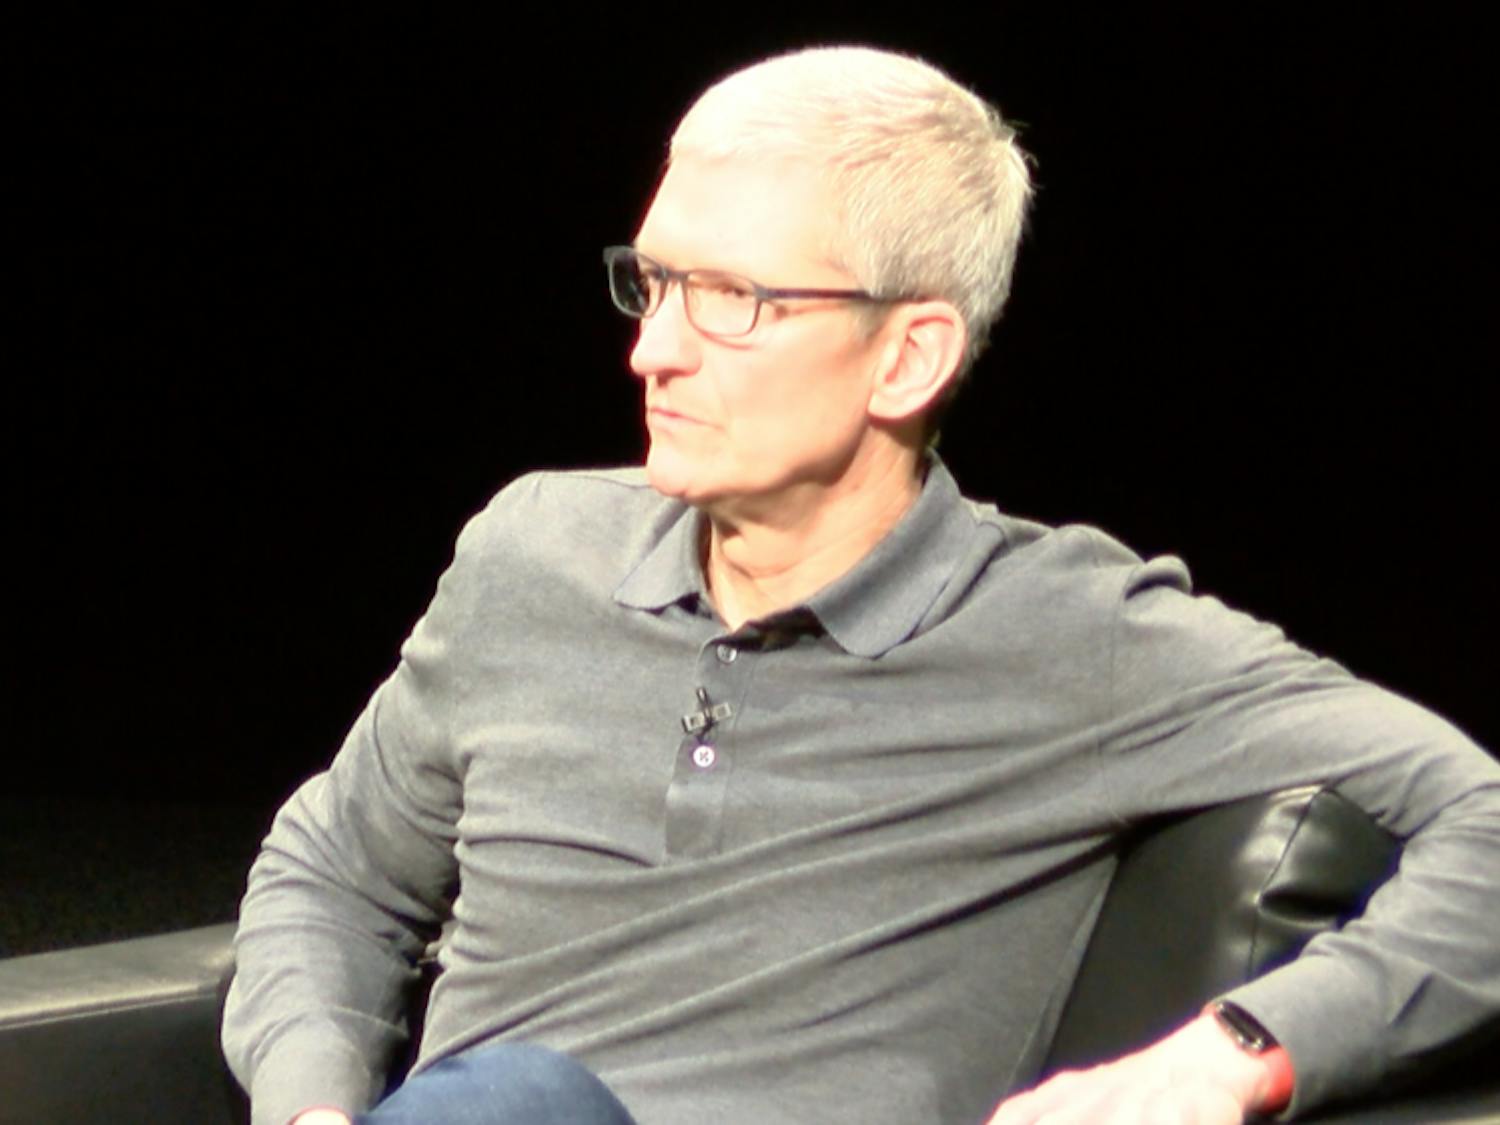 APPLE CEO TIM COOK SITTING ON STAGE